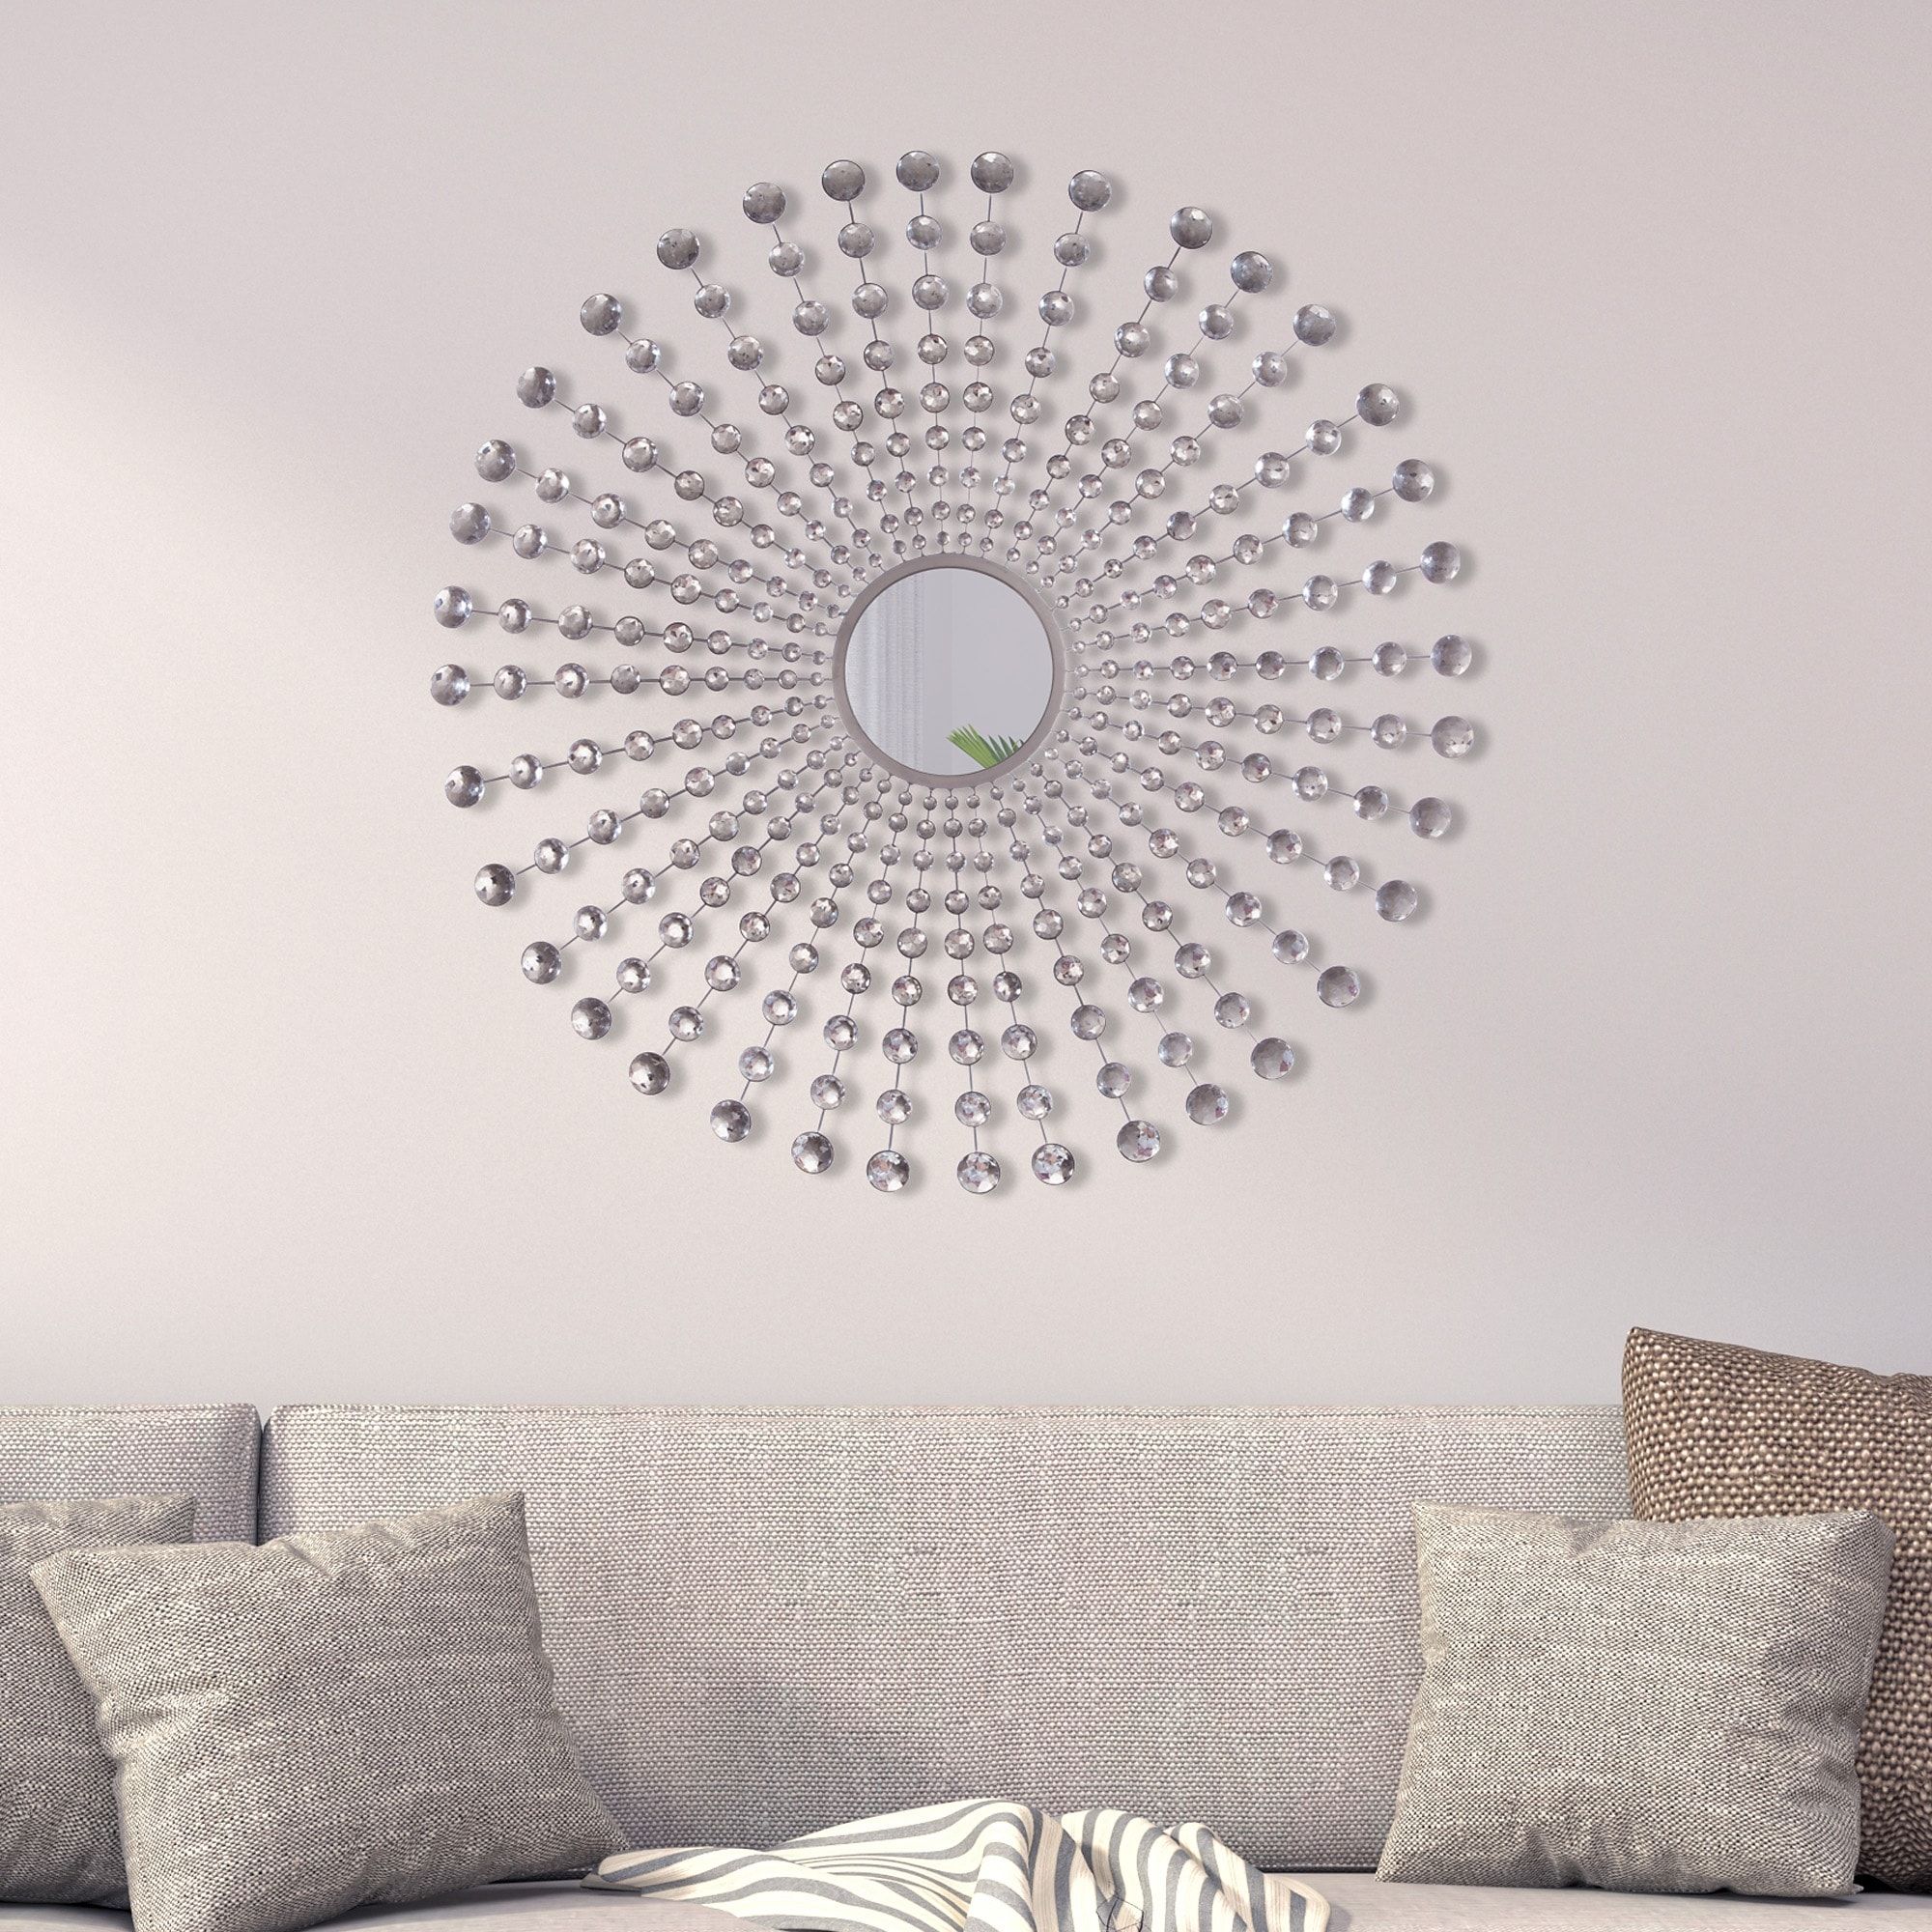 Crystal Beaded Jeweled Round Starburst Wall Mount Mirror, Silver, 36" X 36"  – Silver – On Sale – Overstock – 22227331 With Regard To Starburst Jeweled Hanging Wall Art (View 9 of 15)